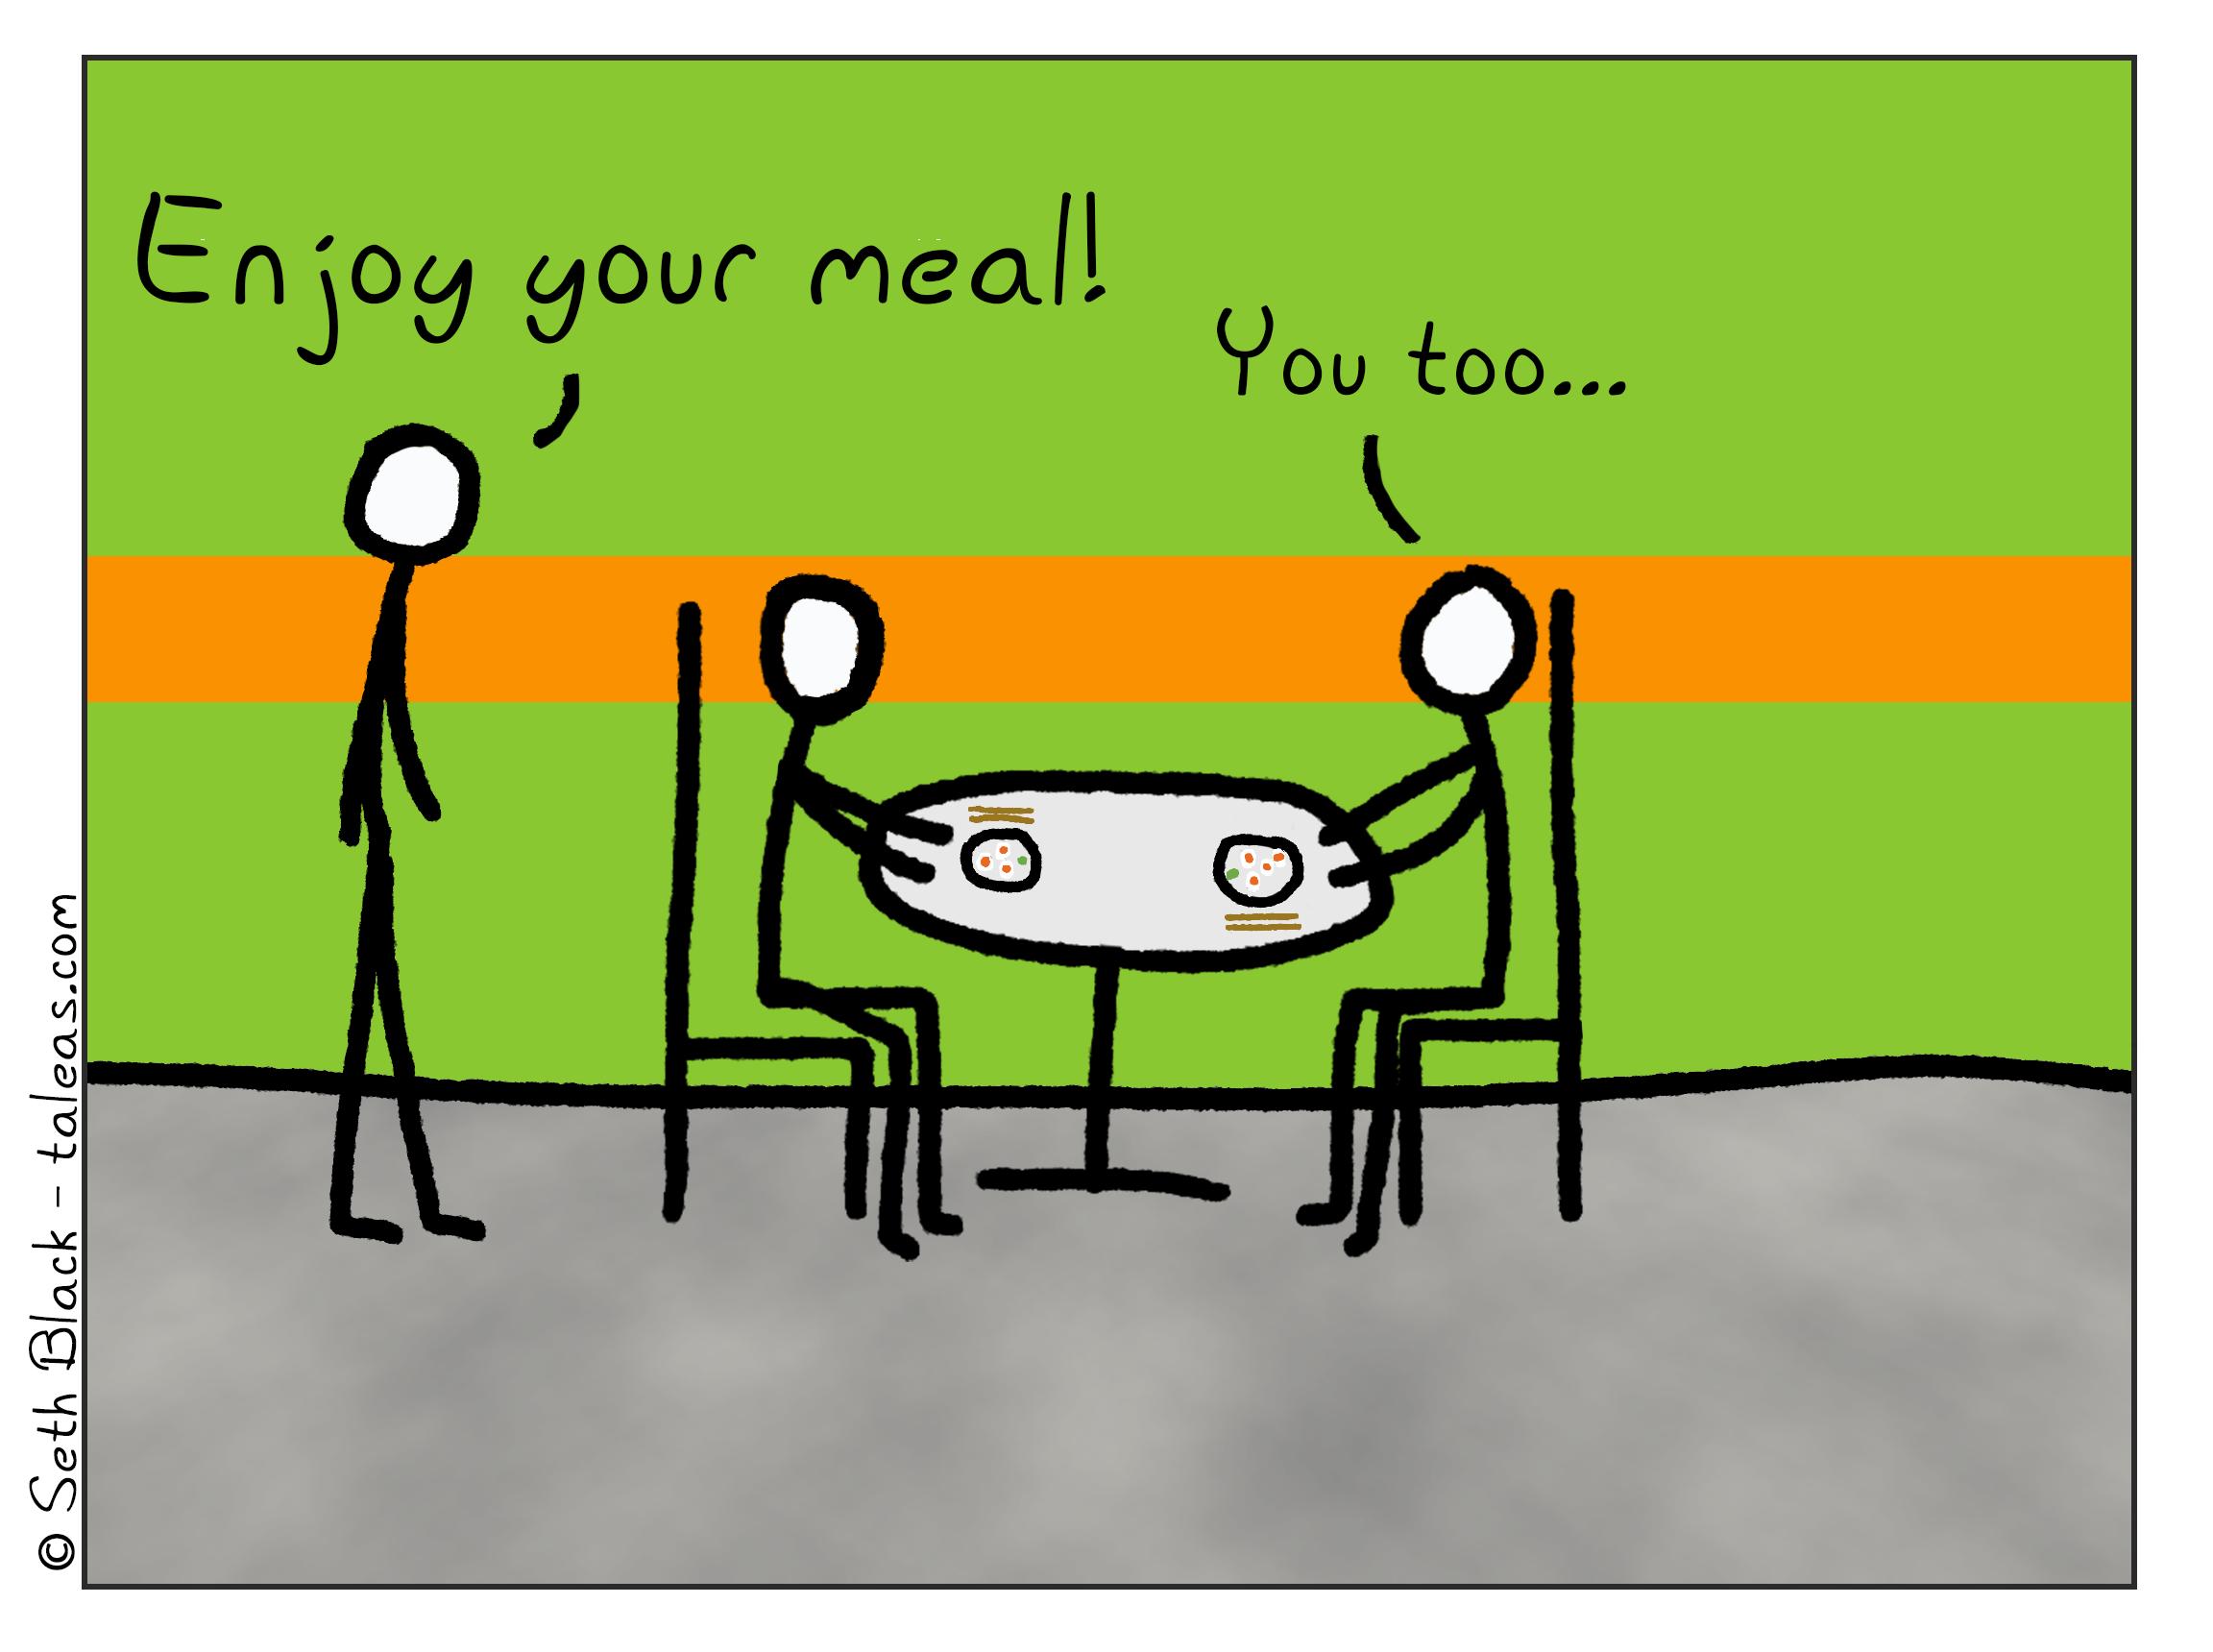 Two stick figures are sitting at a table with plates of sushi and chopsticks, the waiter stick figure says, "Enjoy your meal!" One of the seated stick figures responds, "you too...".